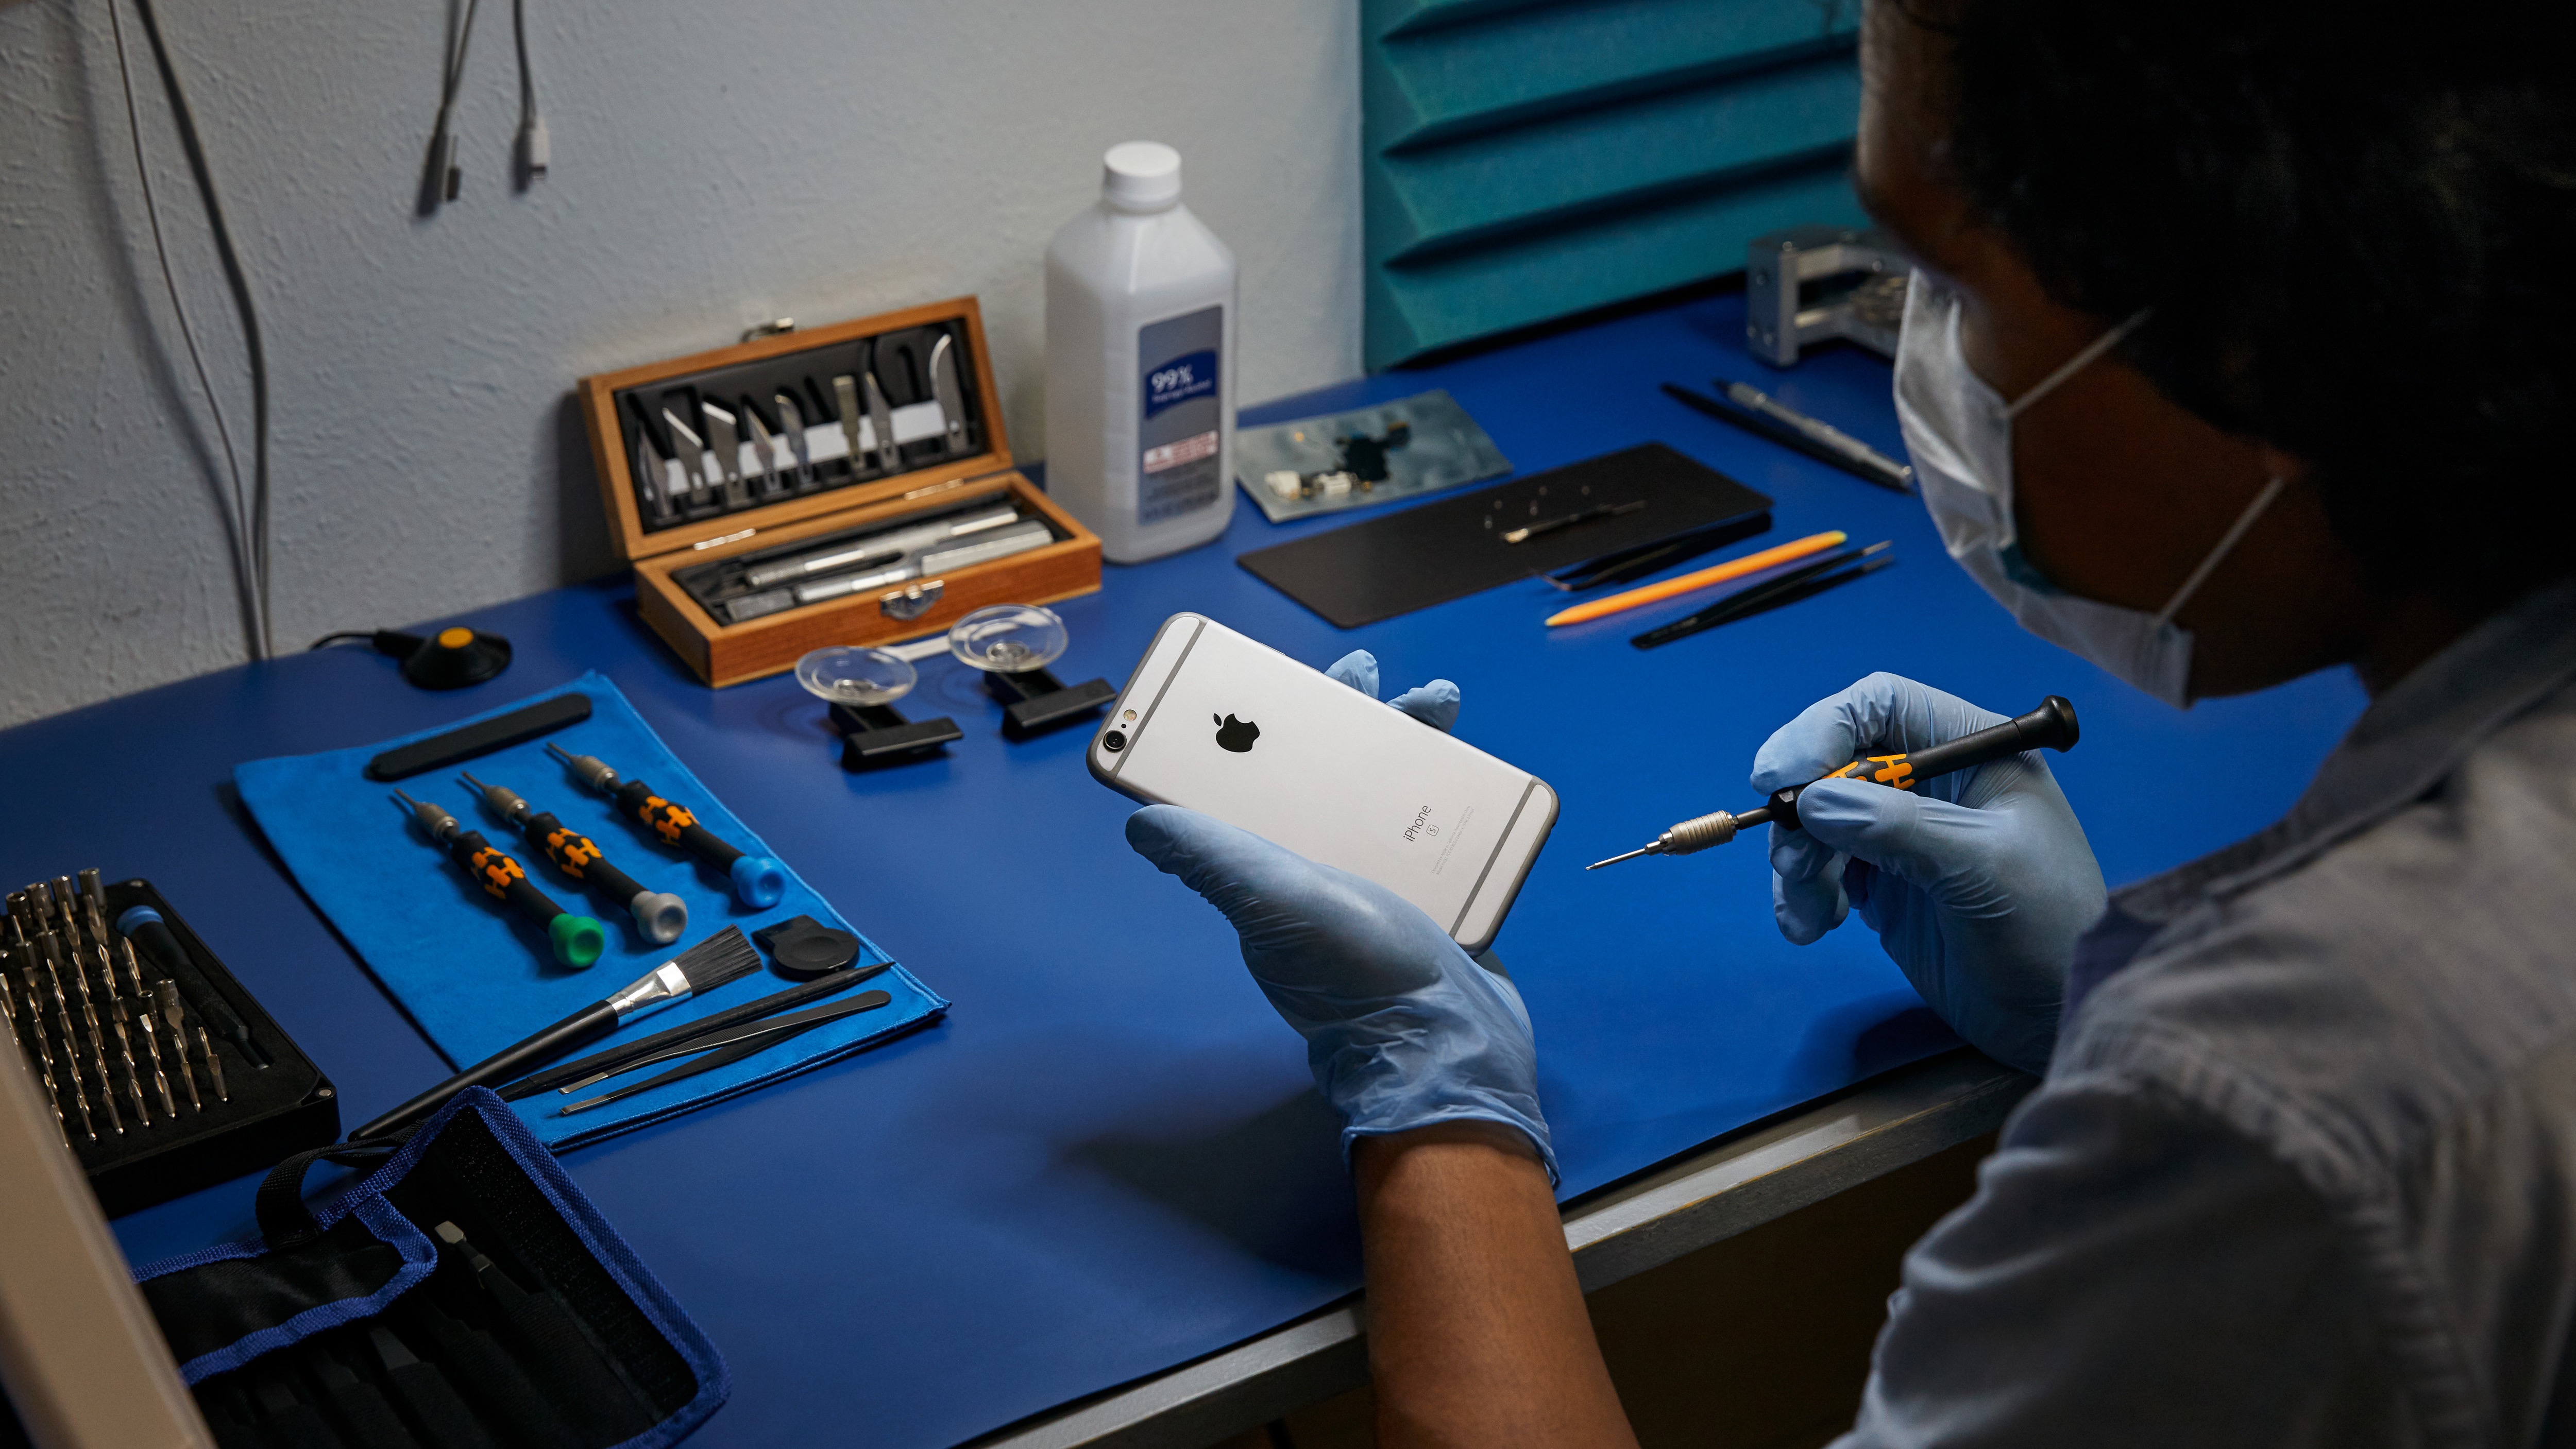 Users will be able to repair their own iPhone with Apple's new Self Service Repair program.